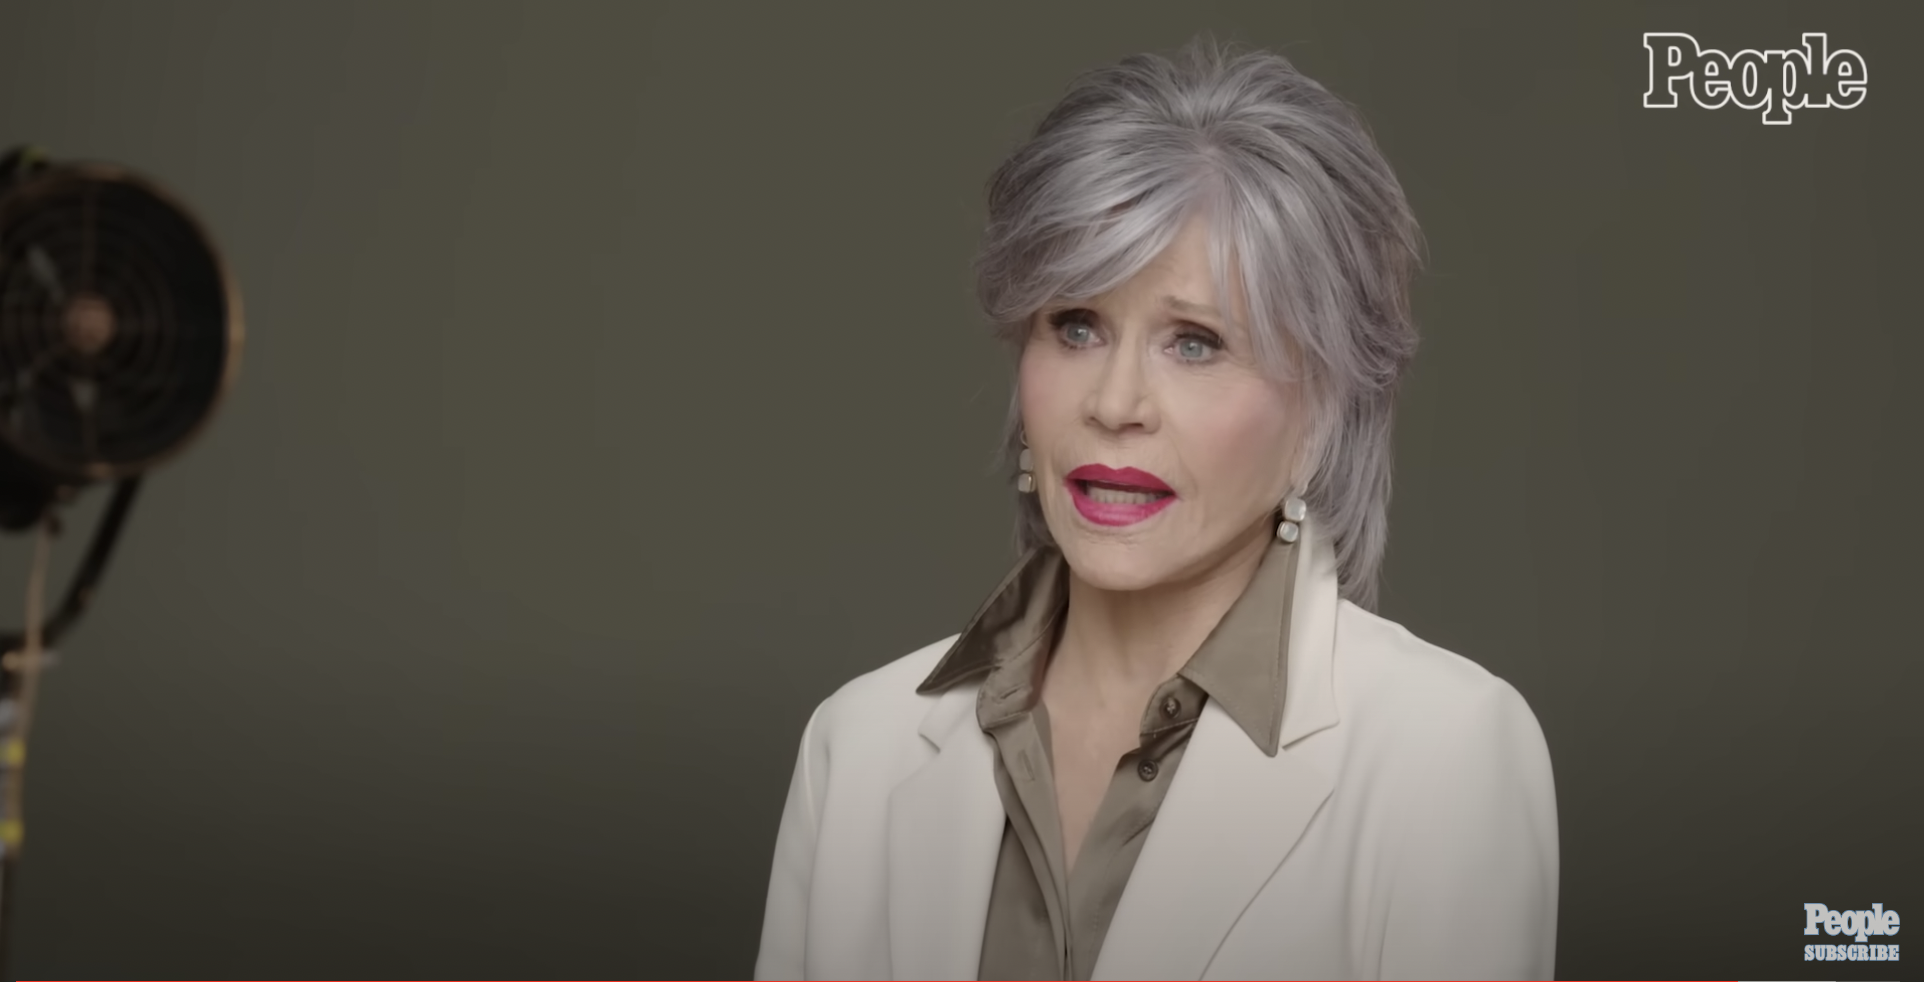 Jane Fonda gets candid in an interview with People | Source: youtube.com/People